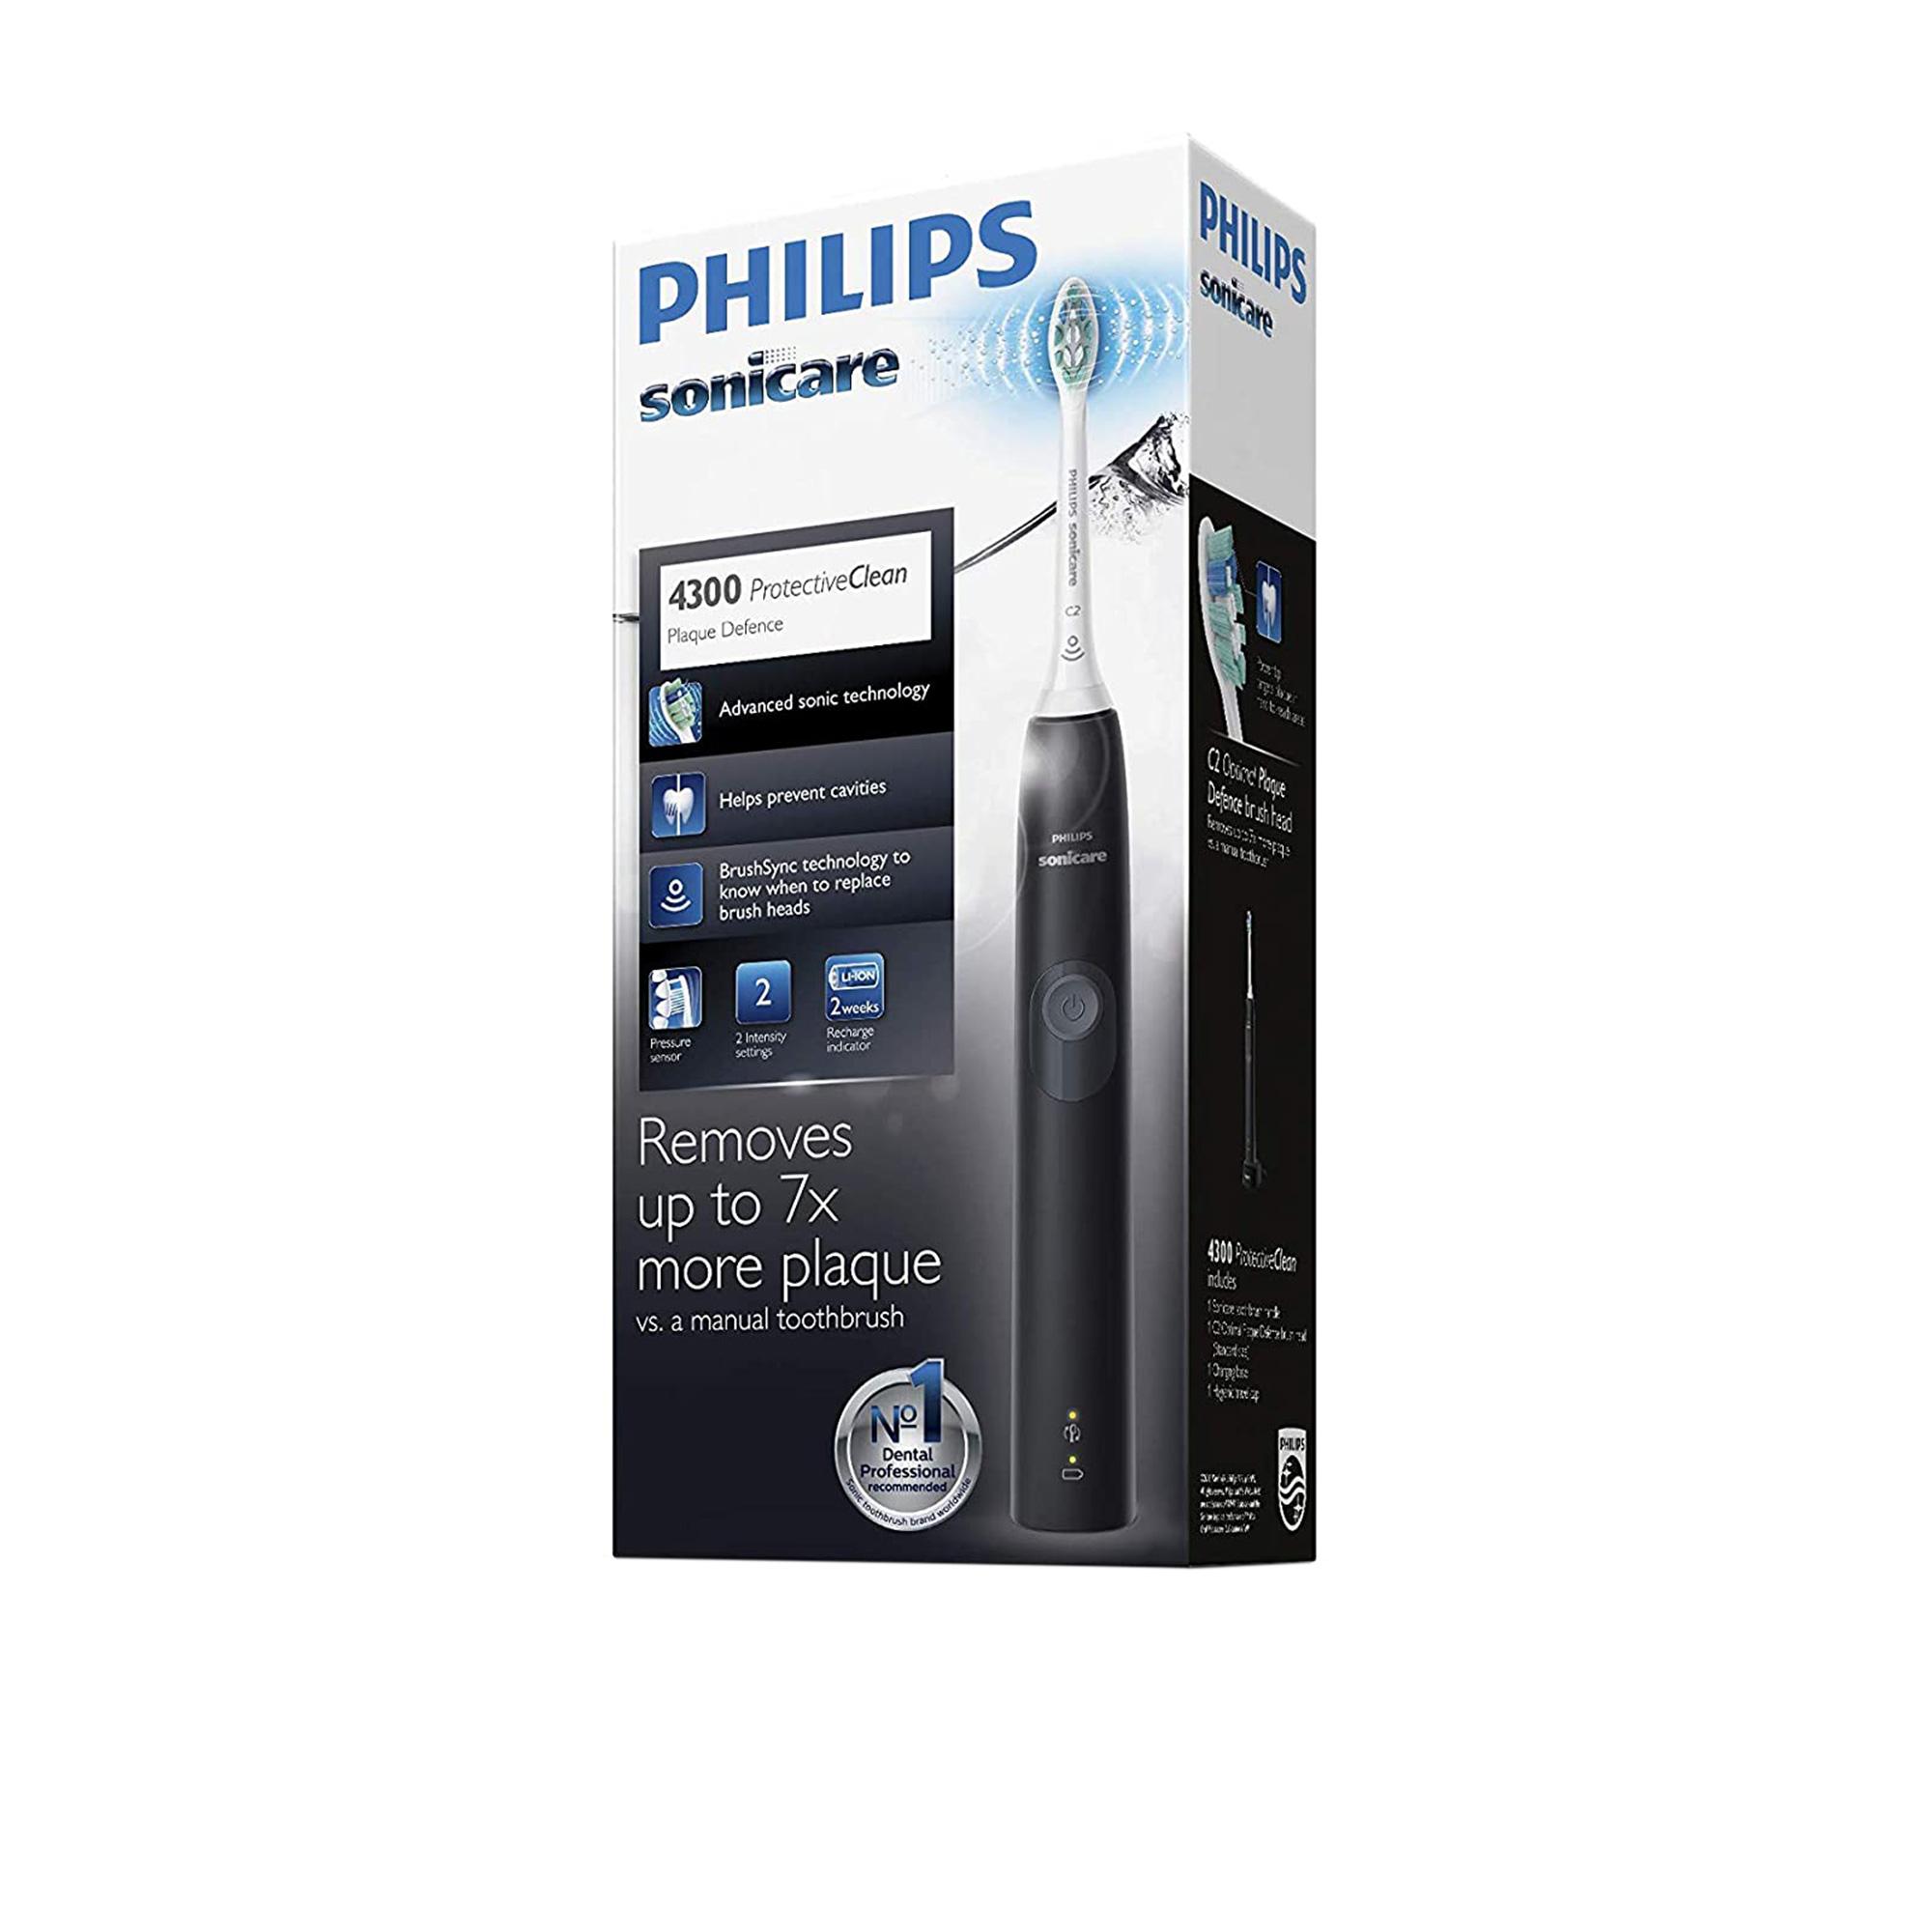 Philips Sonicare ProtectiveClean Plaque Defence Electric Toothbrush 4300 Black Image 4